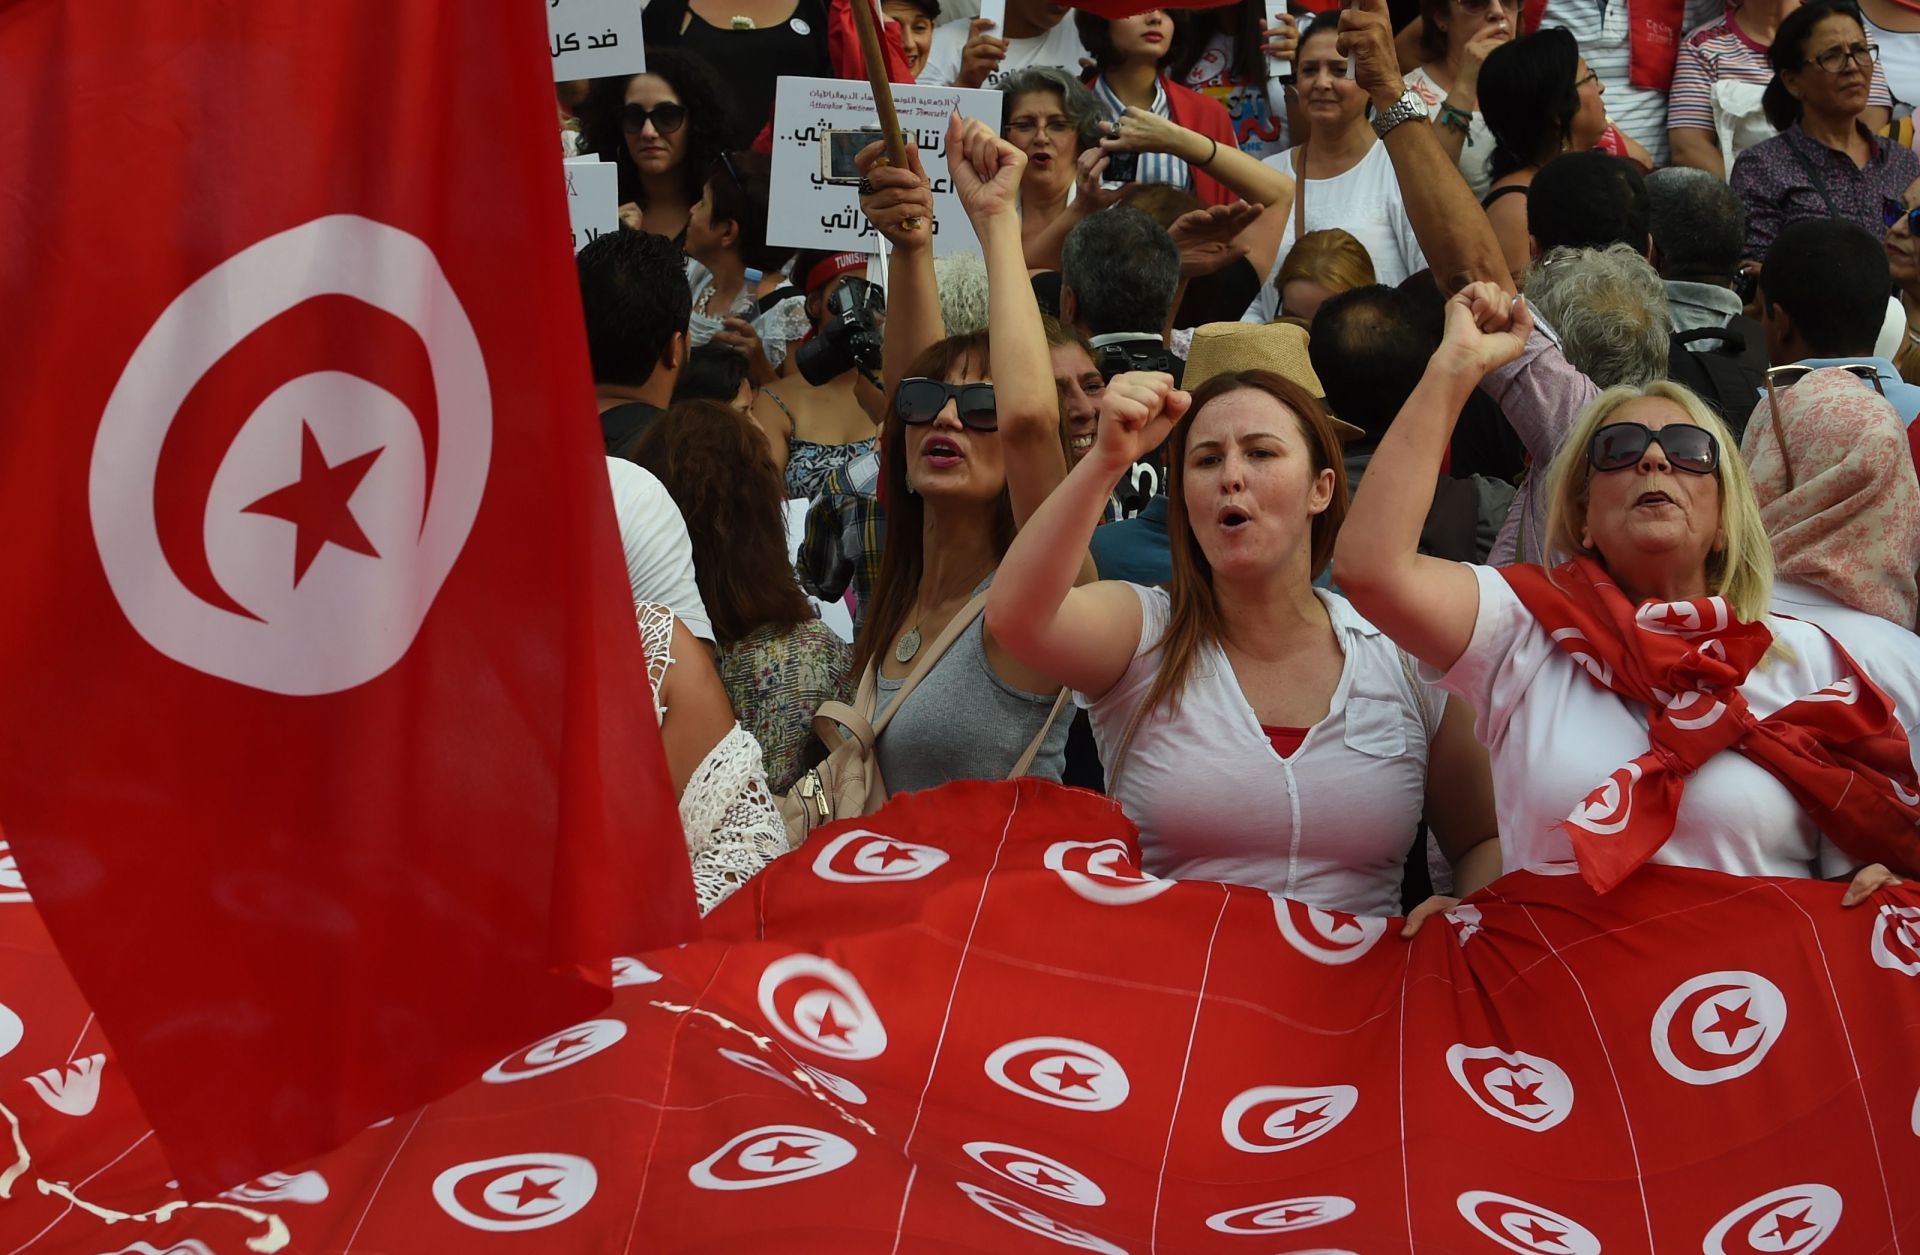 Tunisian women chant slogans and wave their national flag during a demonstration on Aug. 13, 2018, to mark Tunisia's Women's Day and to demand equal inheritance rights for men and women.